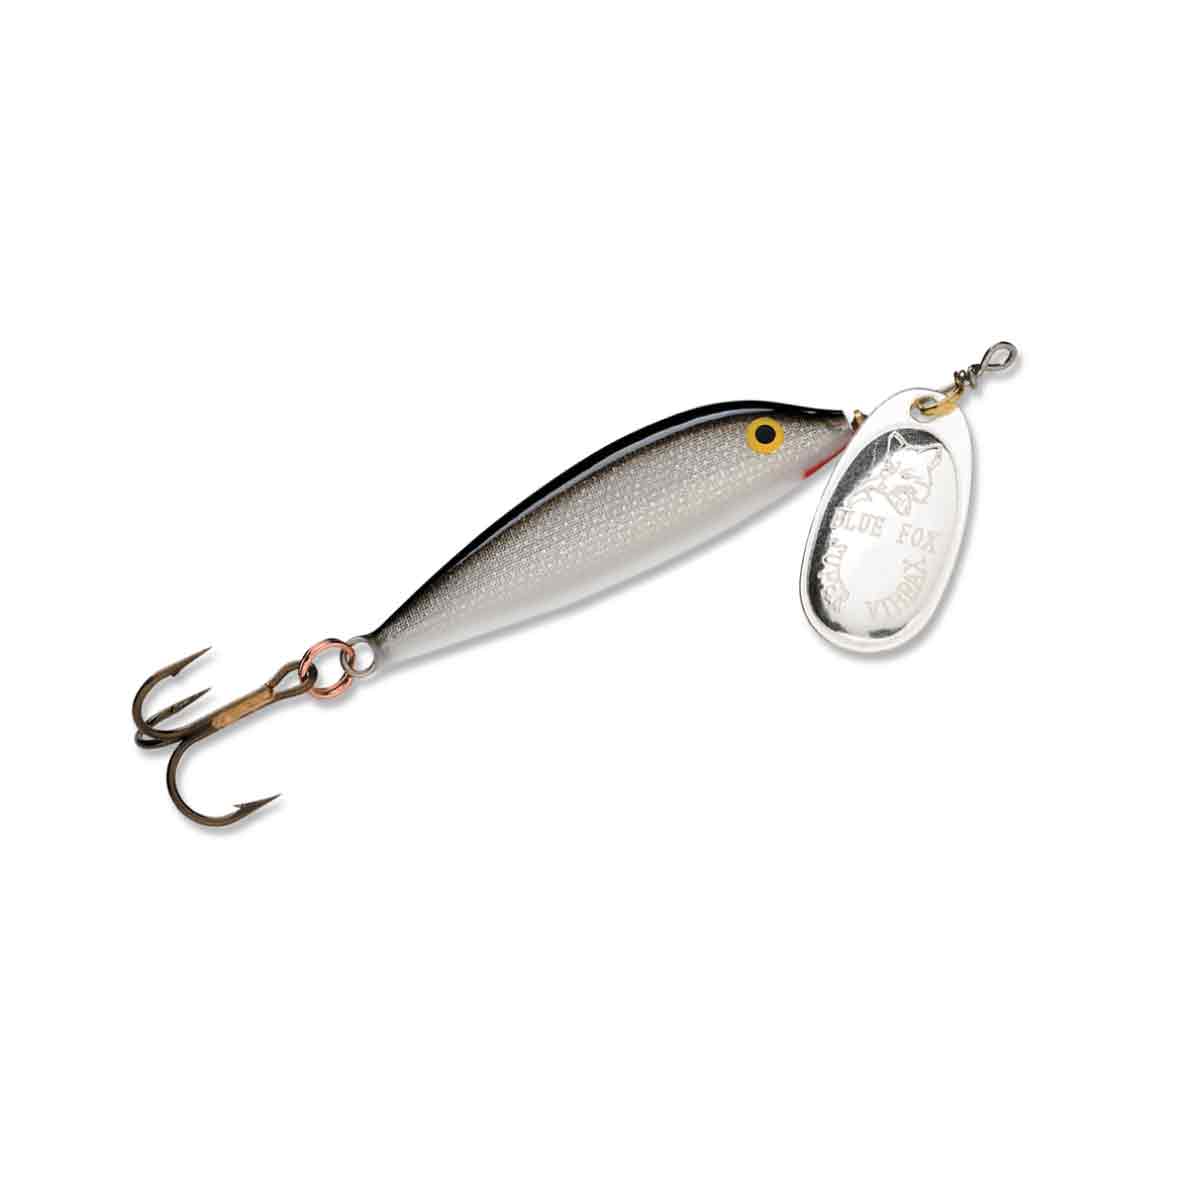 Vibrax Minnow Spin_Silver/Plated Silver